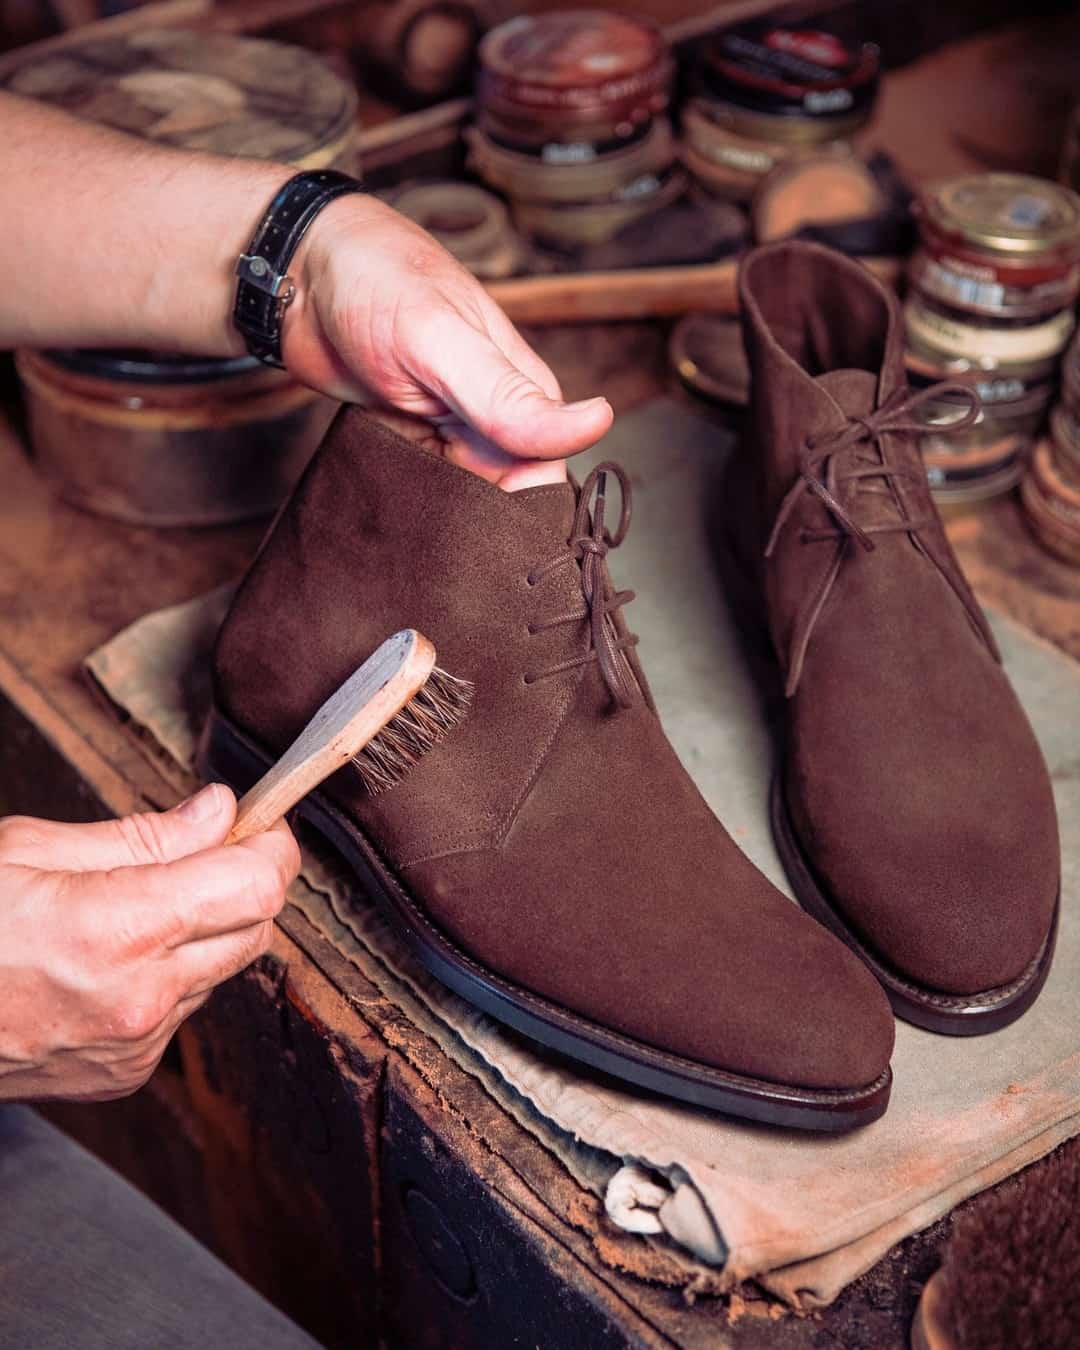 cleaning a pair of suede boots with a brush